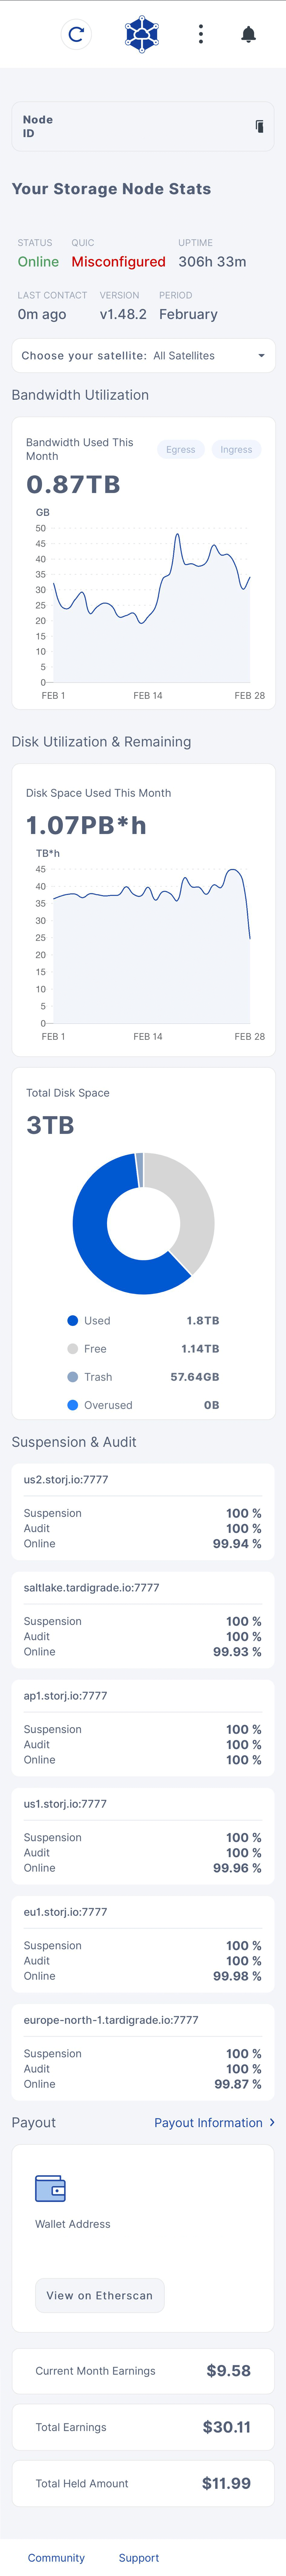 Storj Dashboard end of February 2022. Bandwidth used: 0.87 TB. Hours of storage used: 1.07 PB*h. Total available storage: 3 TB. Used storage: 1.8 TB. Free disk space: 1.14 TB. Recycle bin: 57.64 GB. Earnings this month: $9.58. Total earnings: $30.11. Withheld earnings: $11.99.